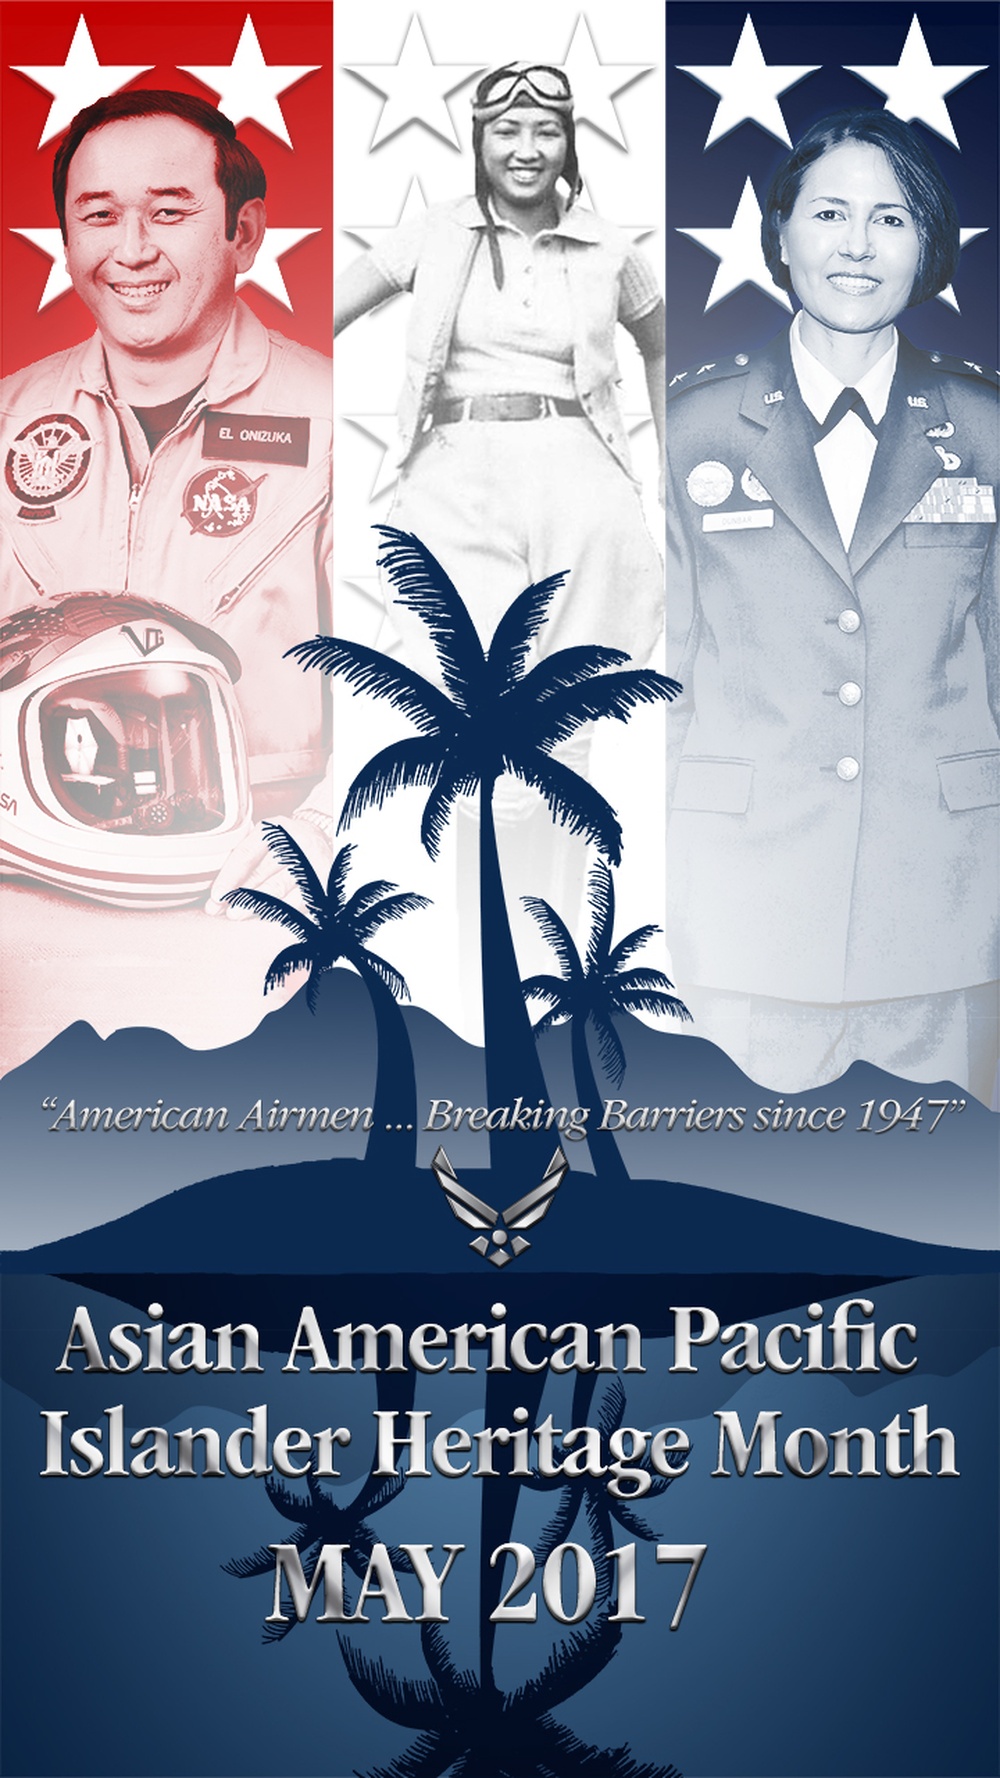 Asian American Pacific Islander Heritage Month Poster Infonet